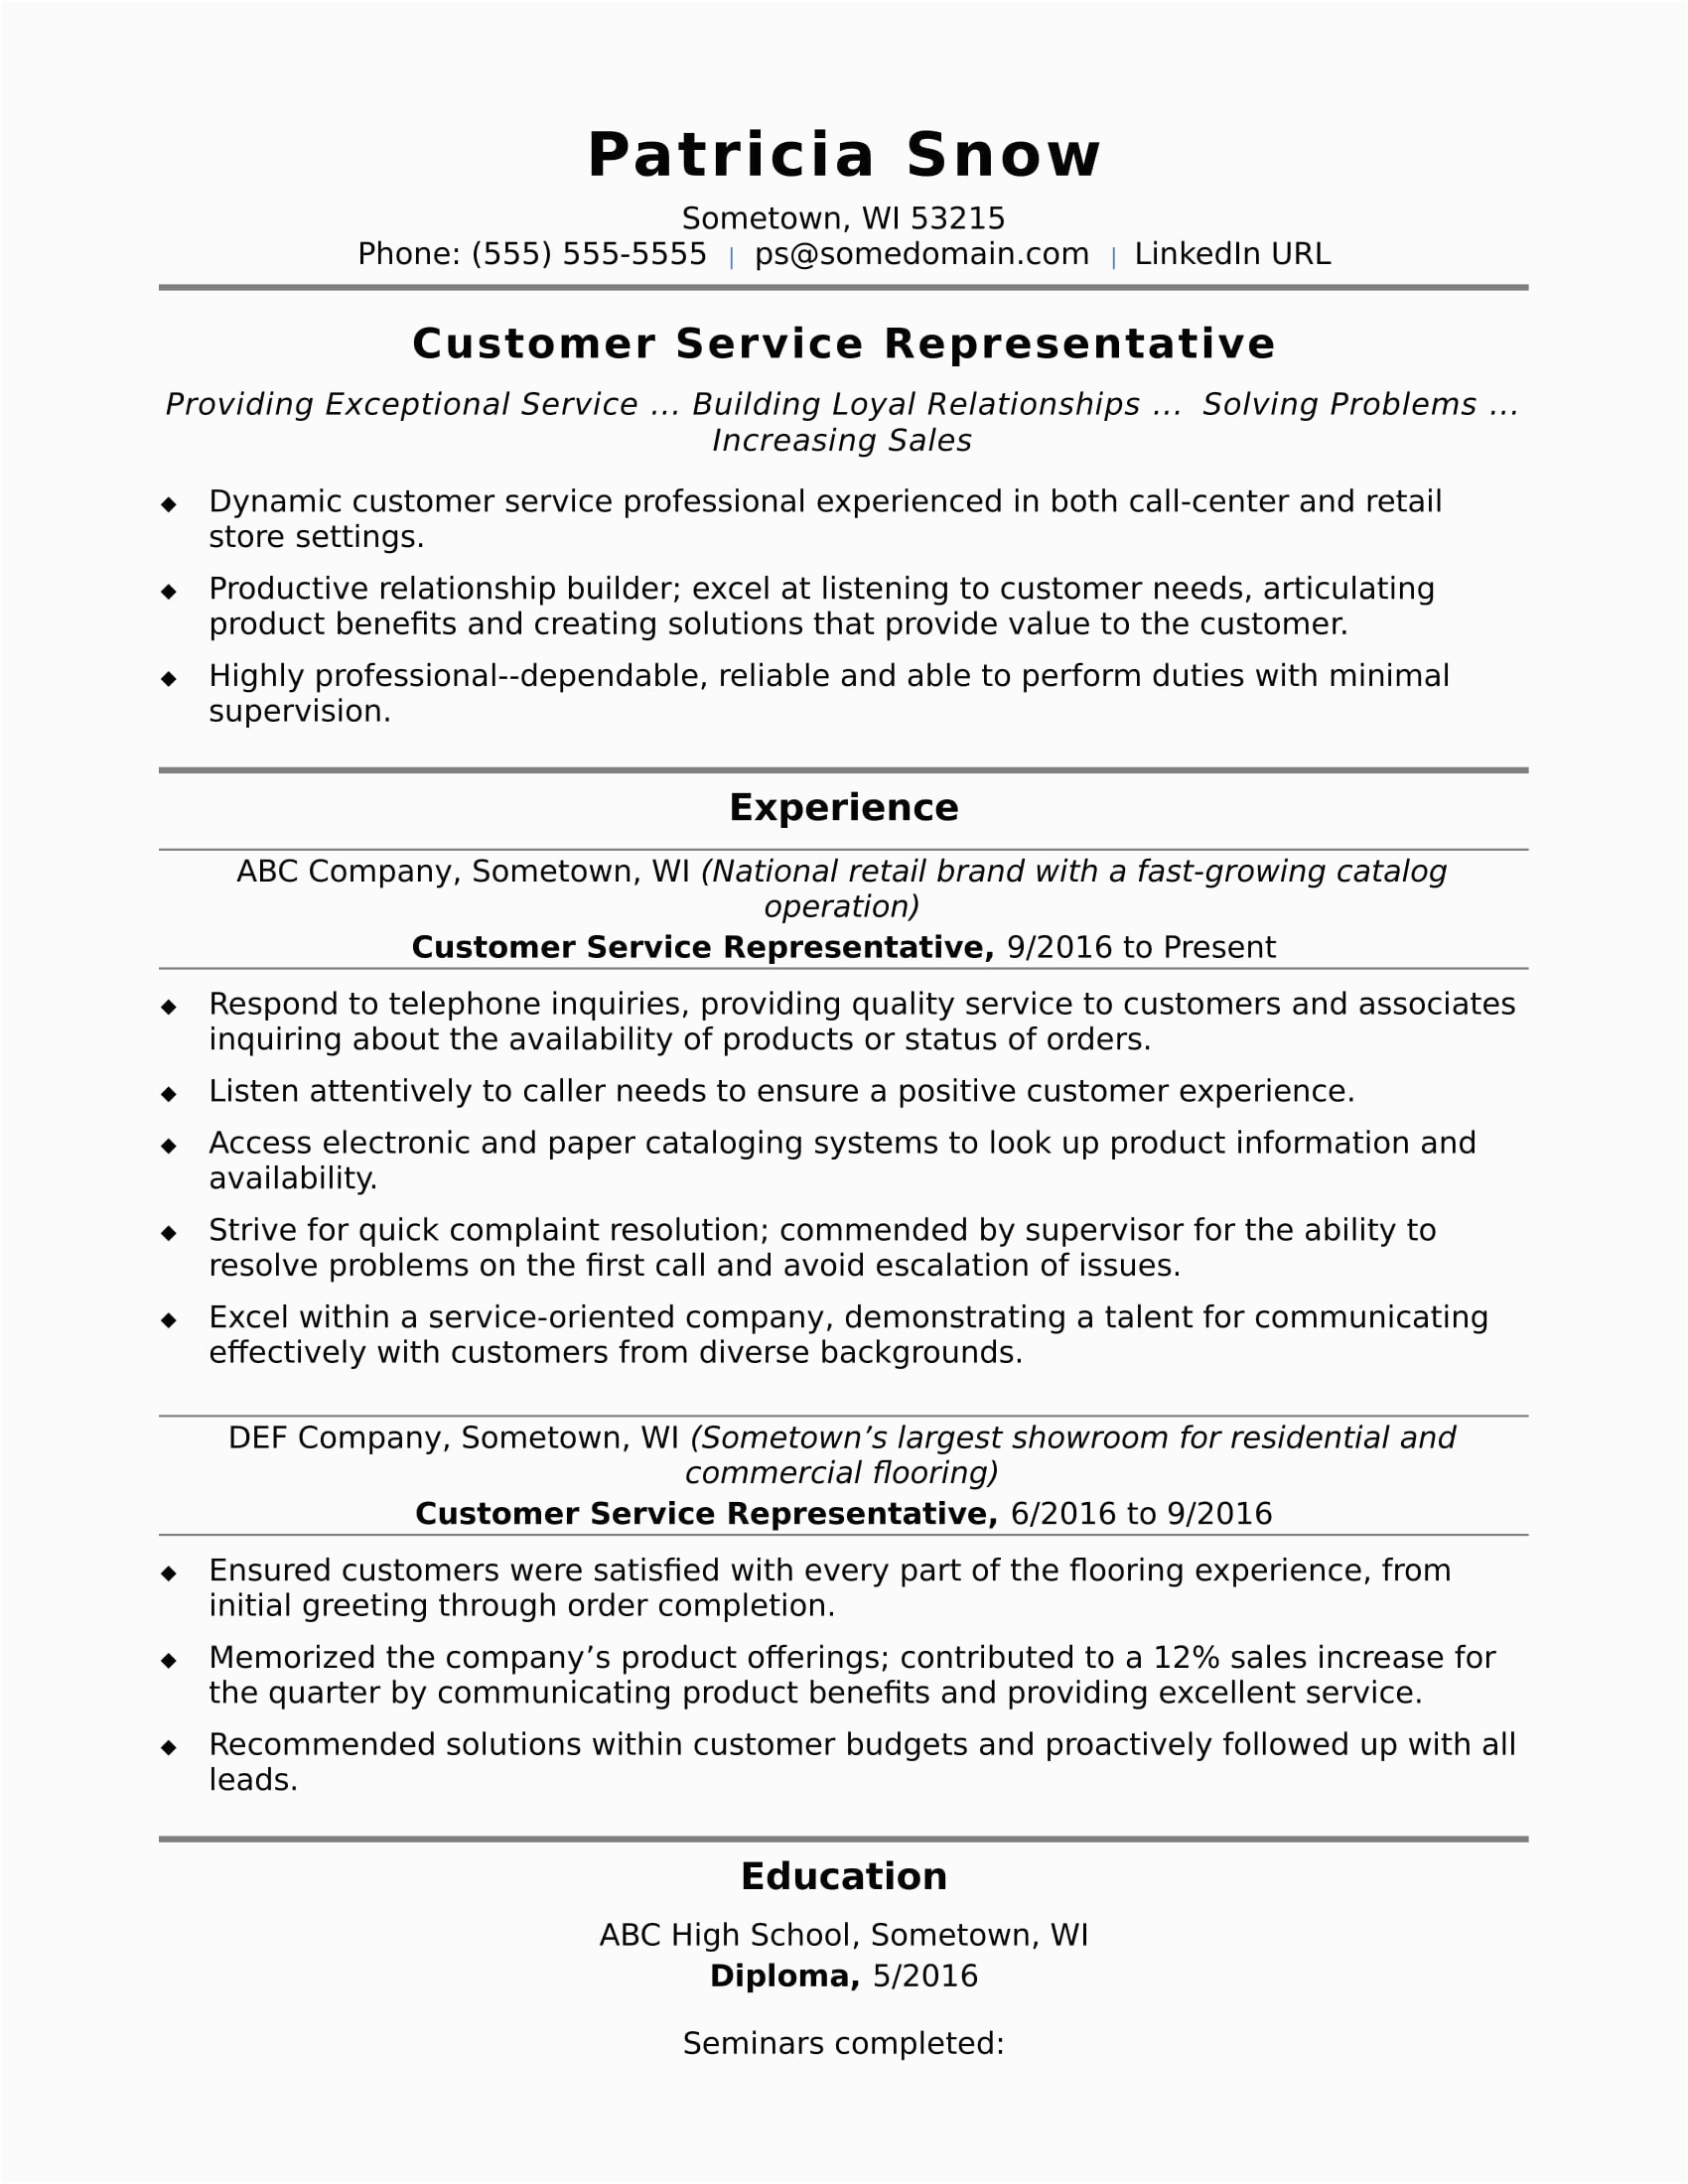 Sample Resume for Technical Support Representative without Experience Sample Resume for Call Center Agent without Experience Philippines